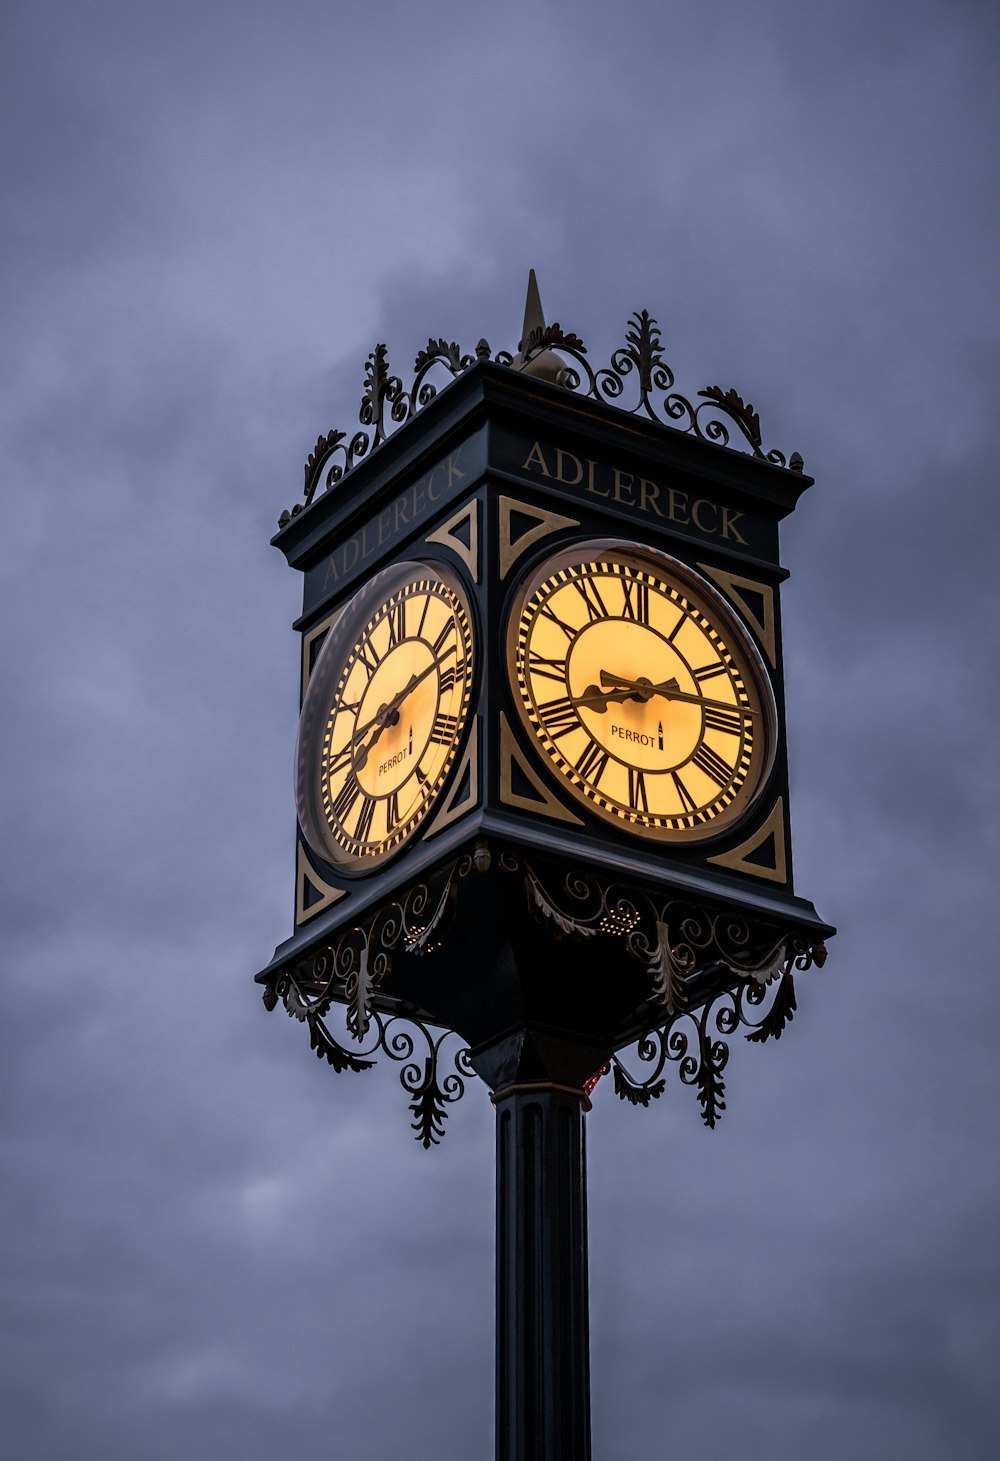 a clock on a pole with a cloudy sky in the background